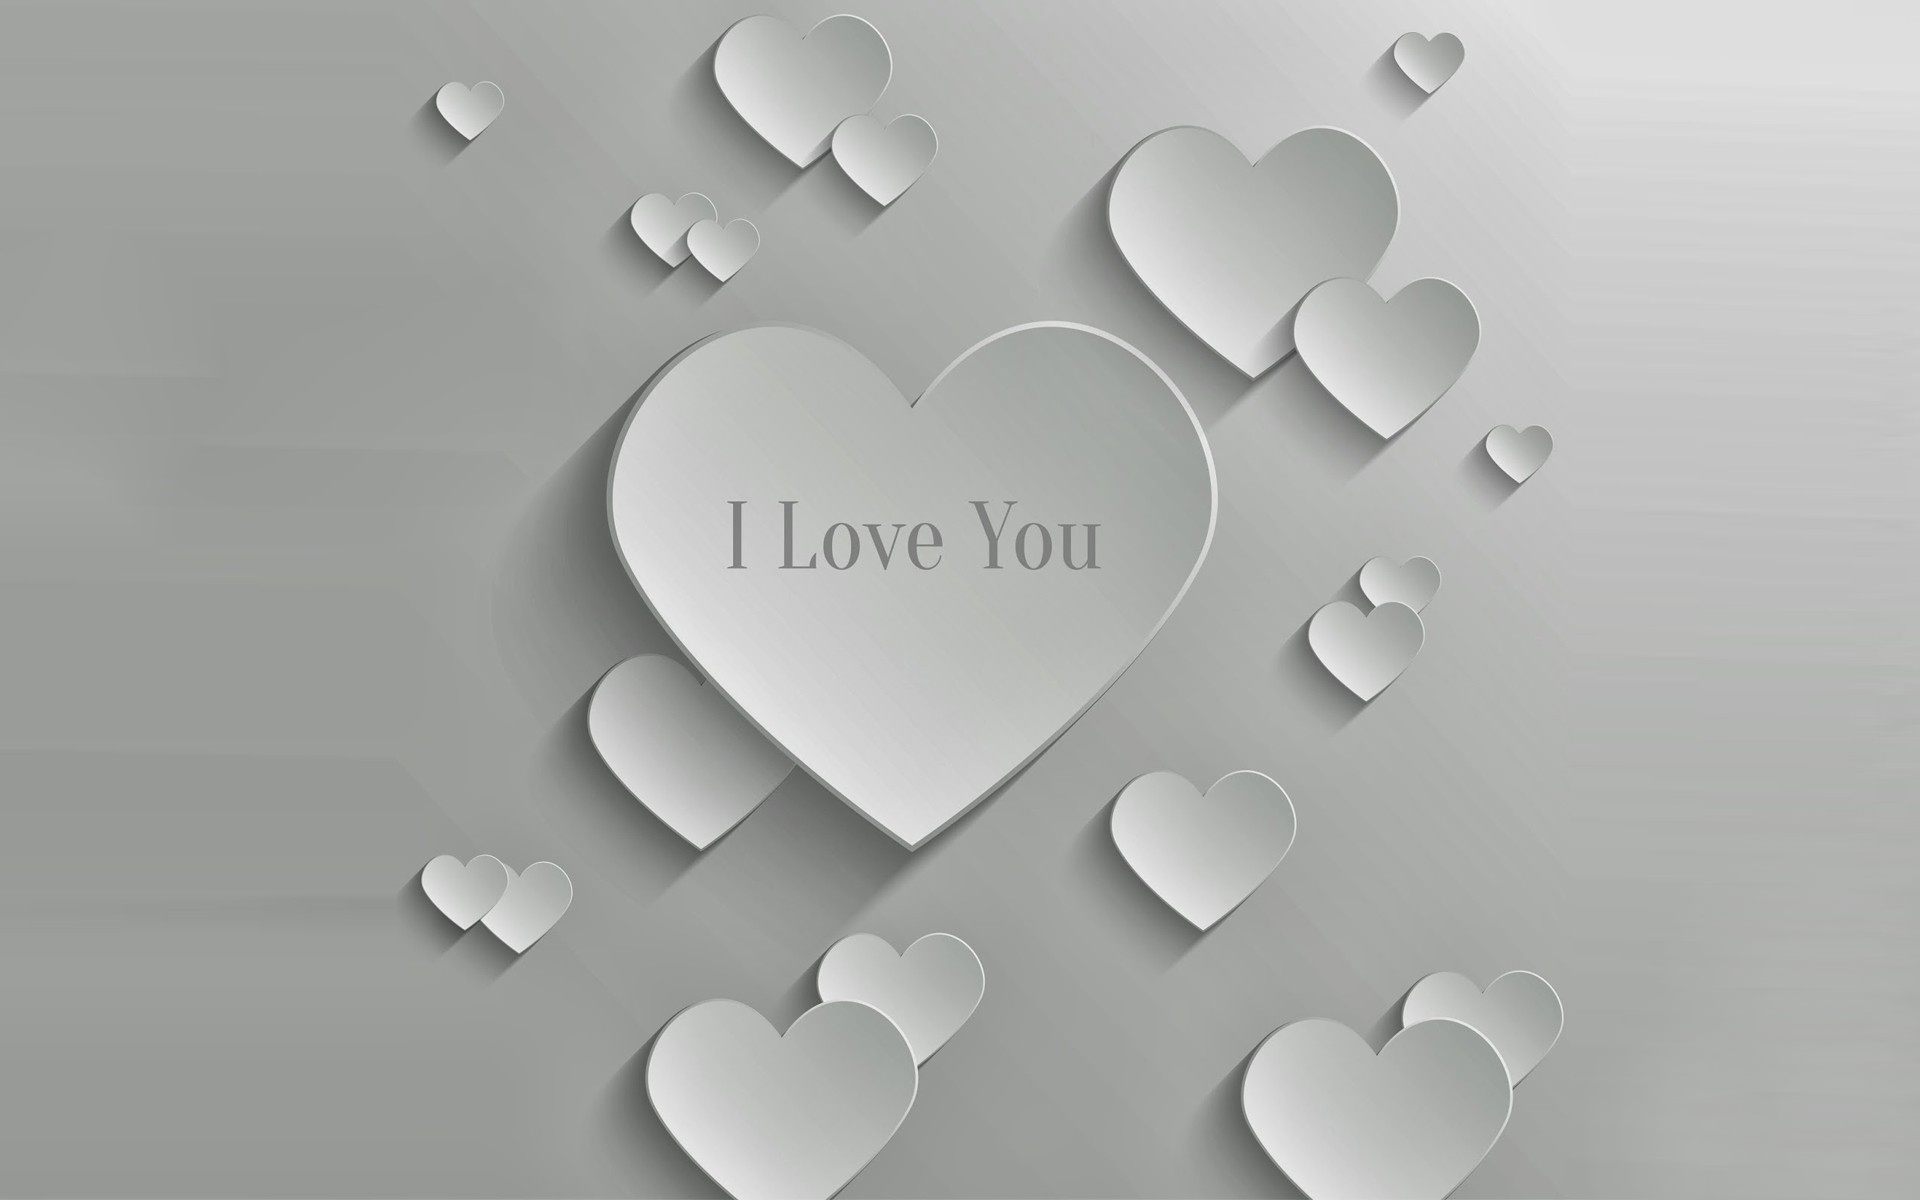 I Love You Hd Images Wallpapers - Gray Love - 1920x1200 Wallpaper -  